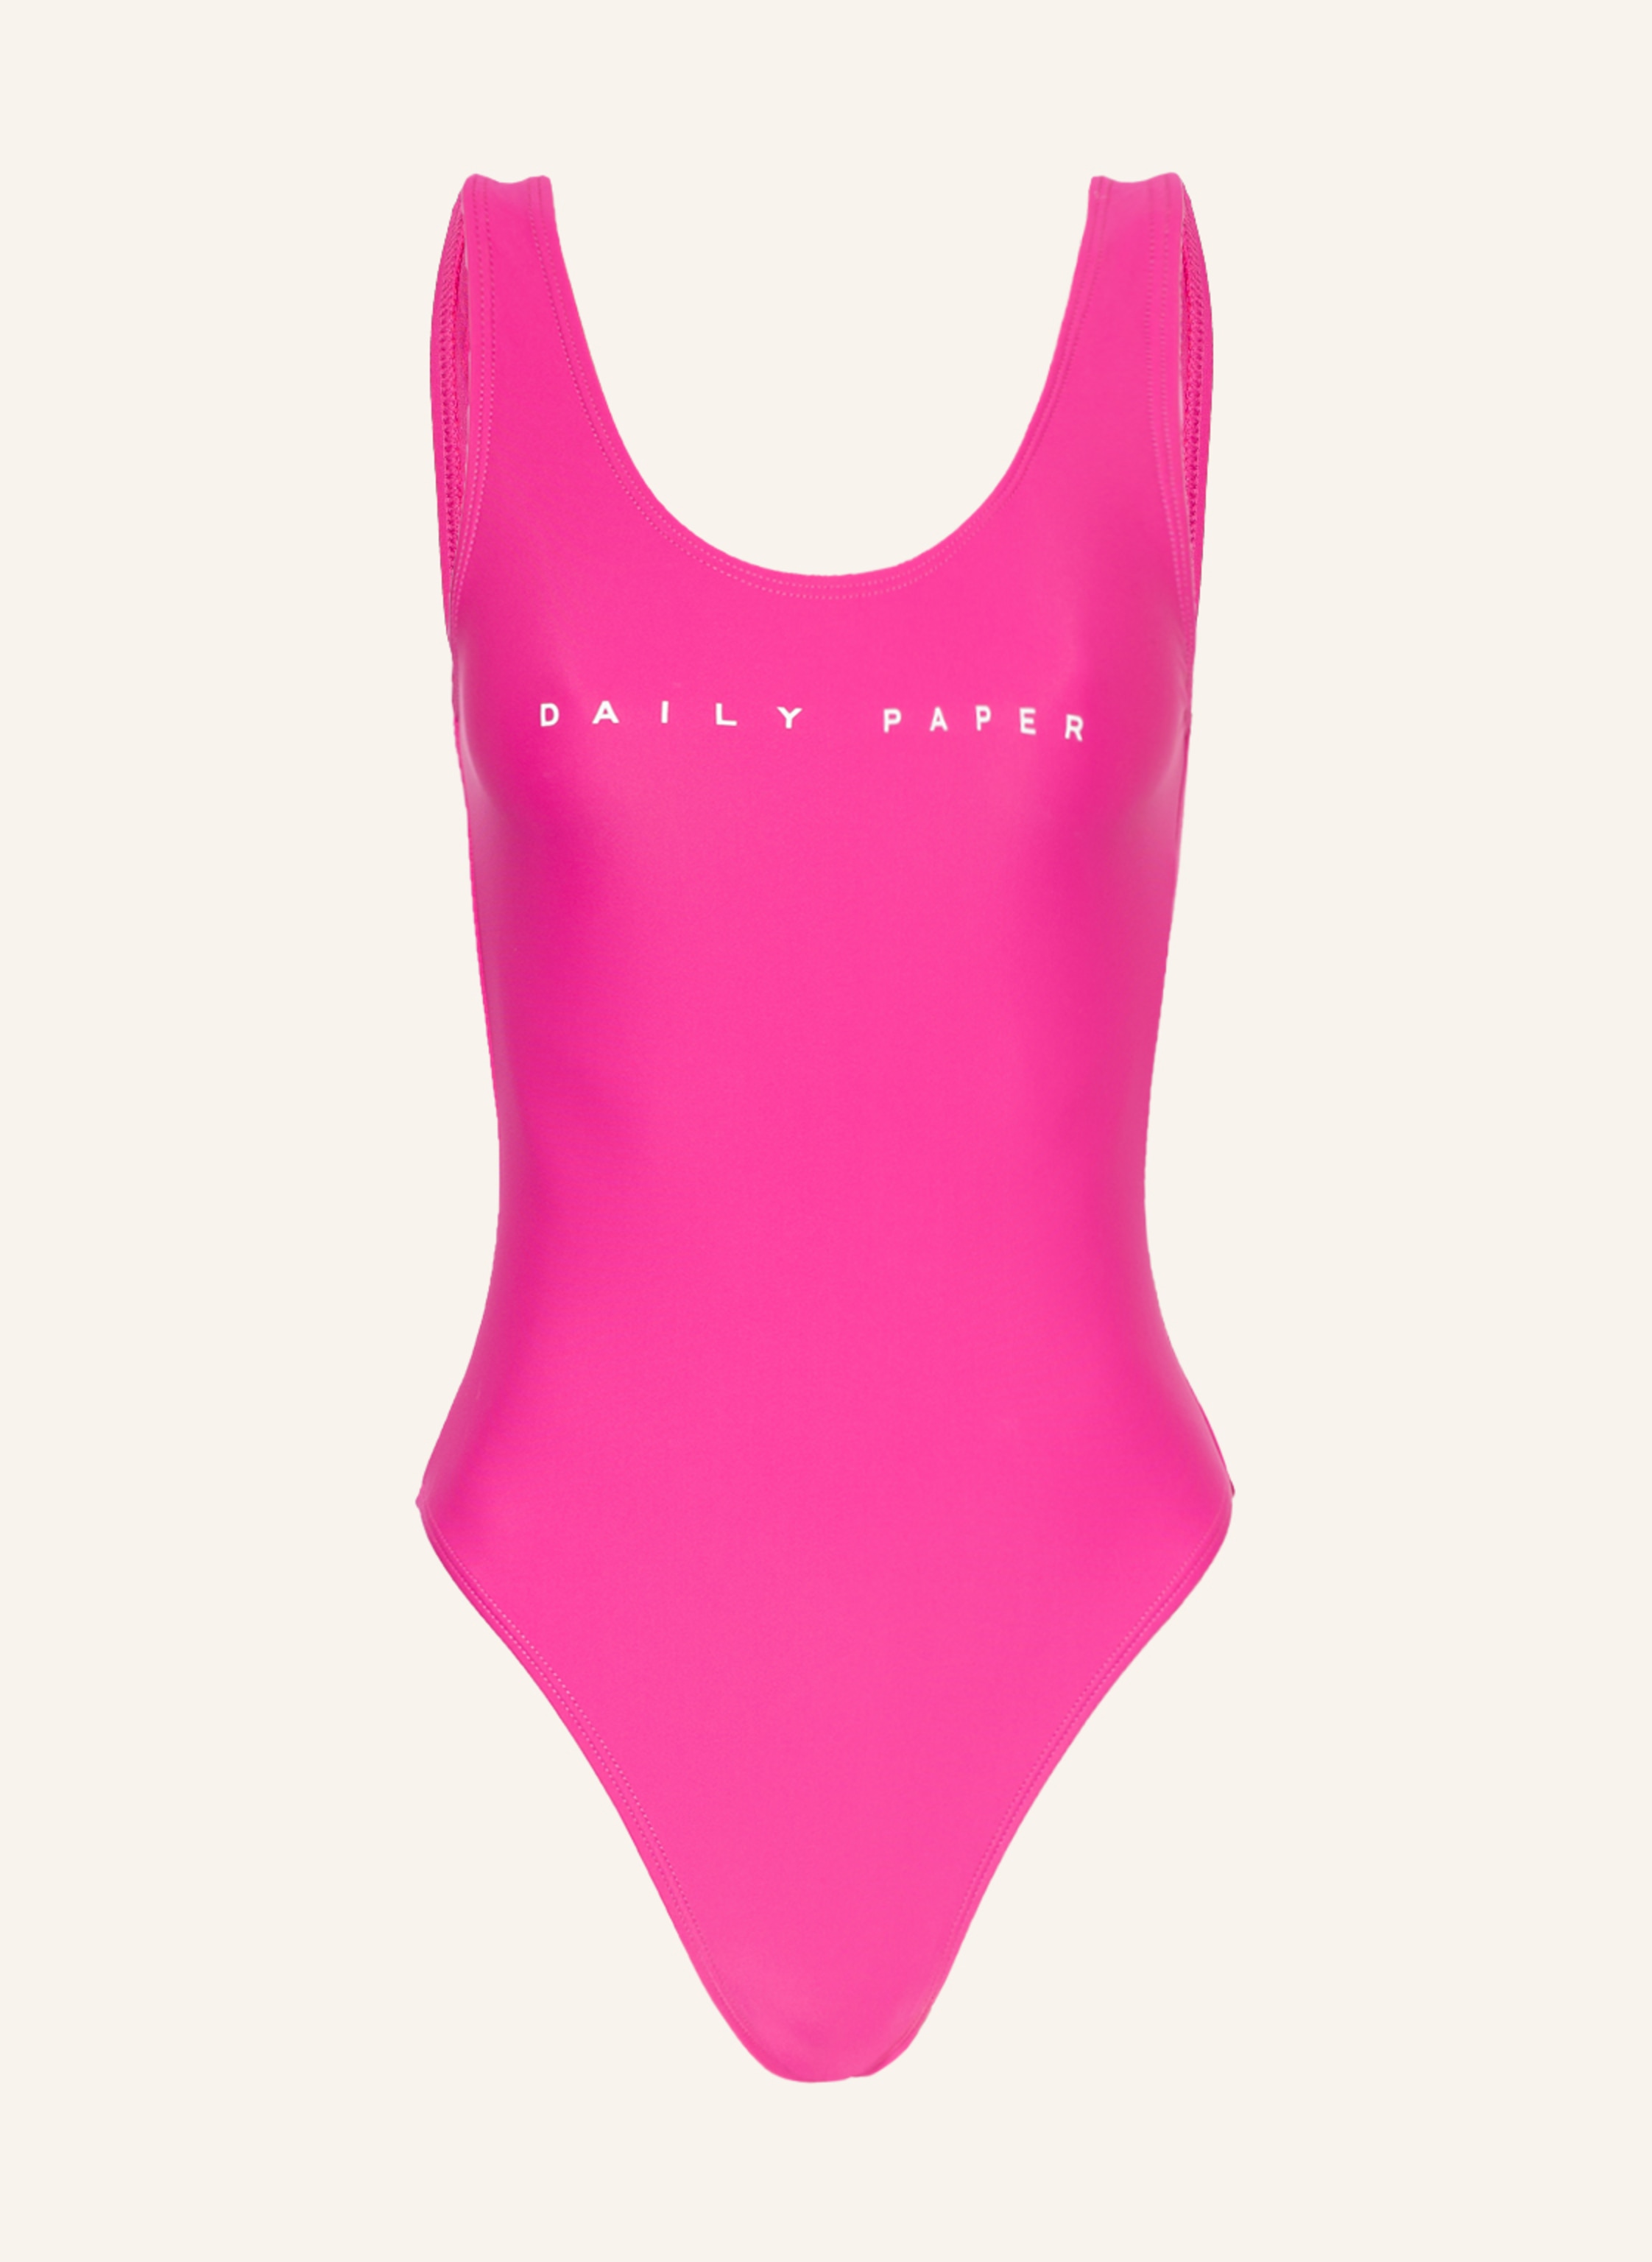 DAILY PAPER Swimsuit ERISE in pink